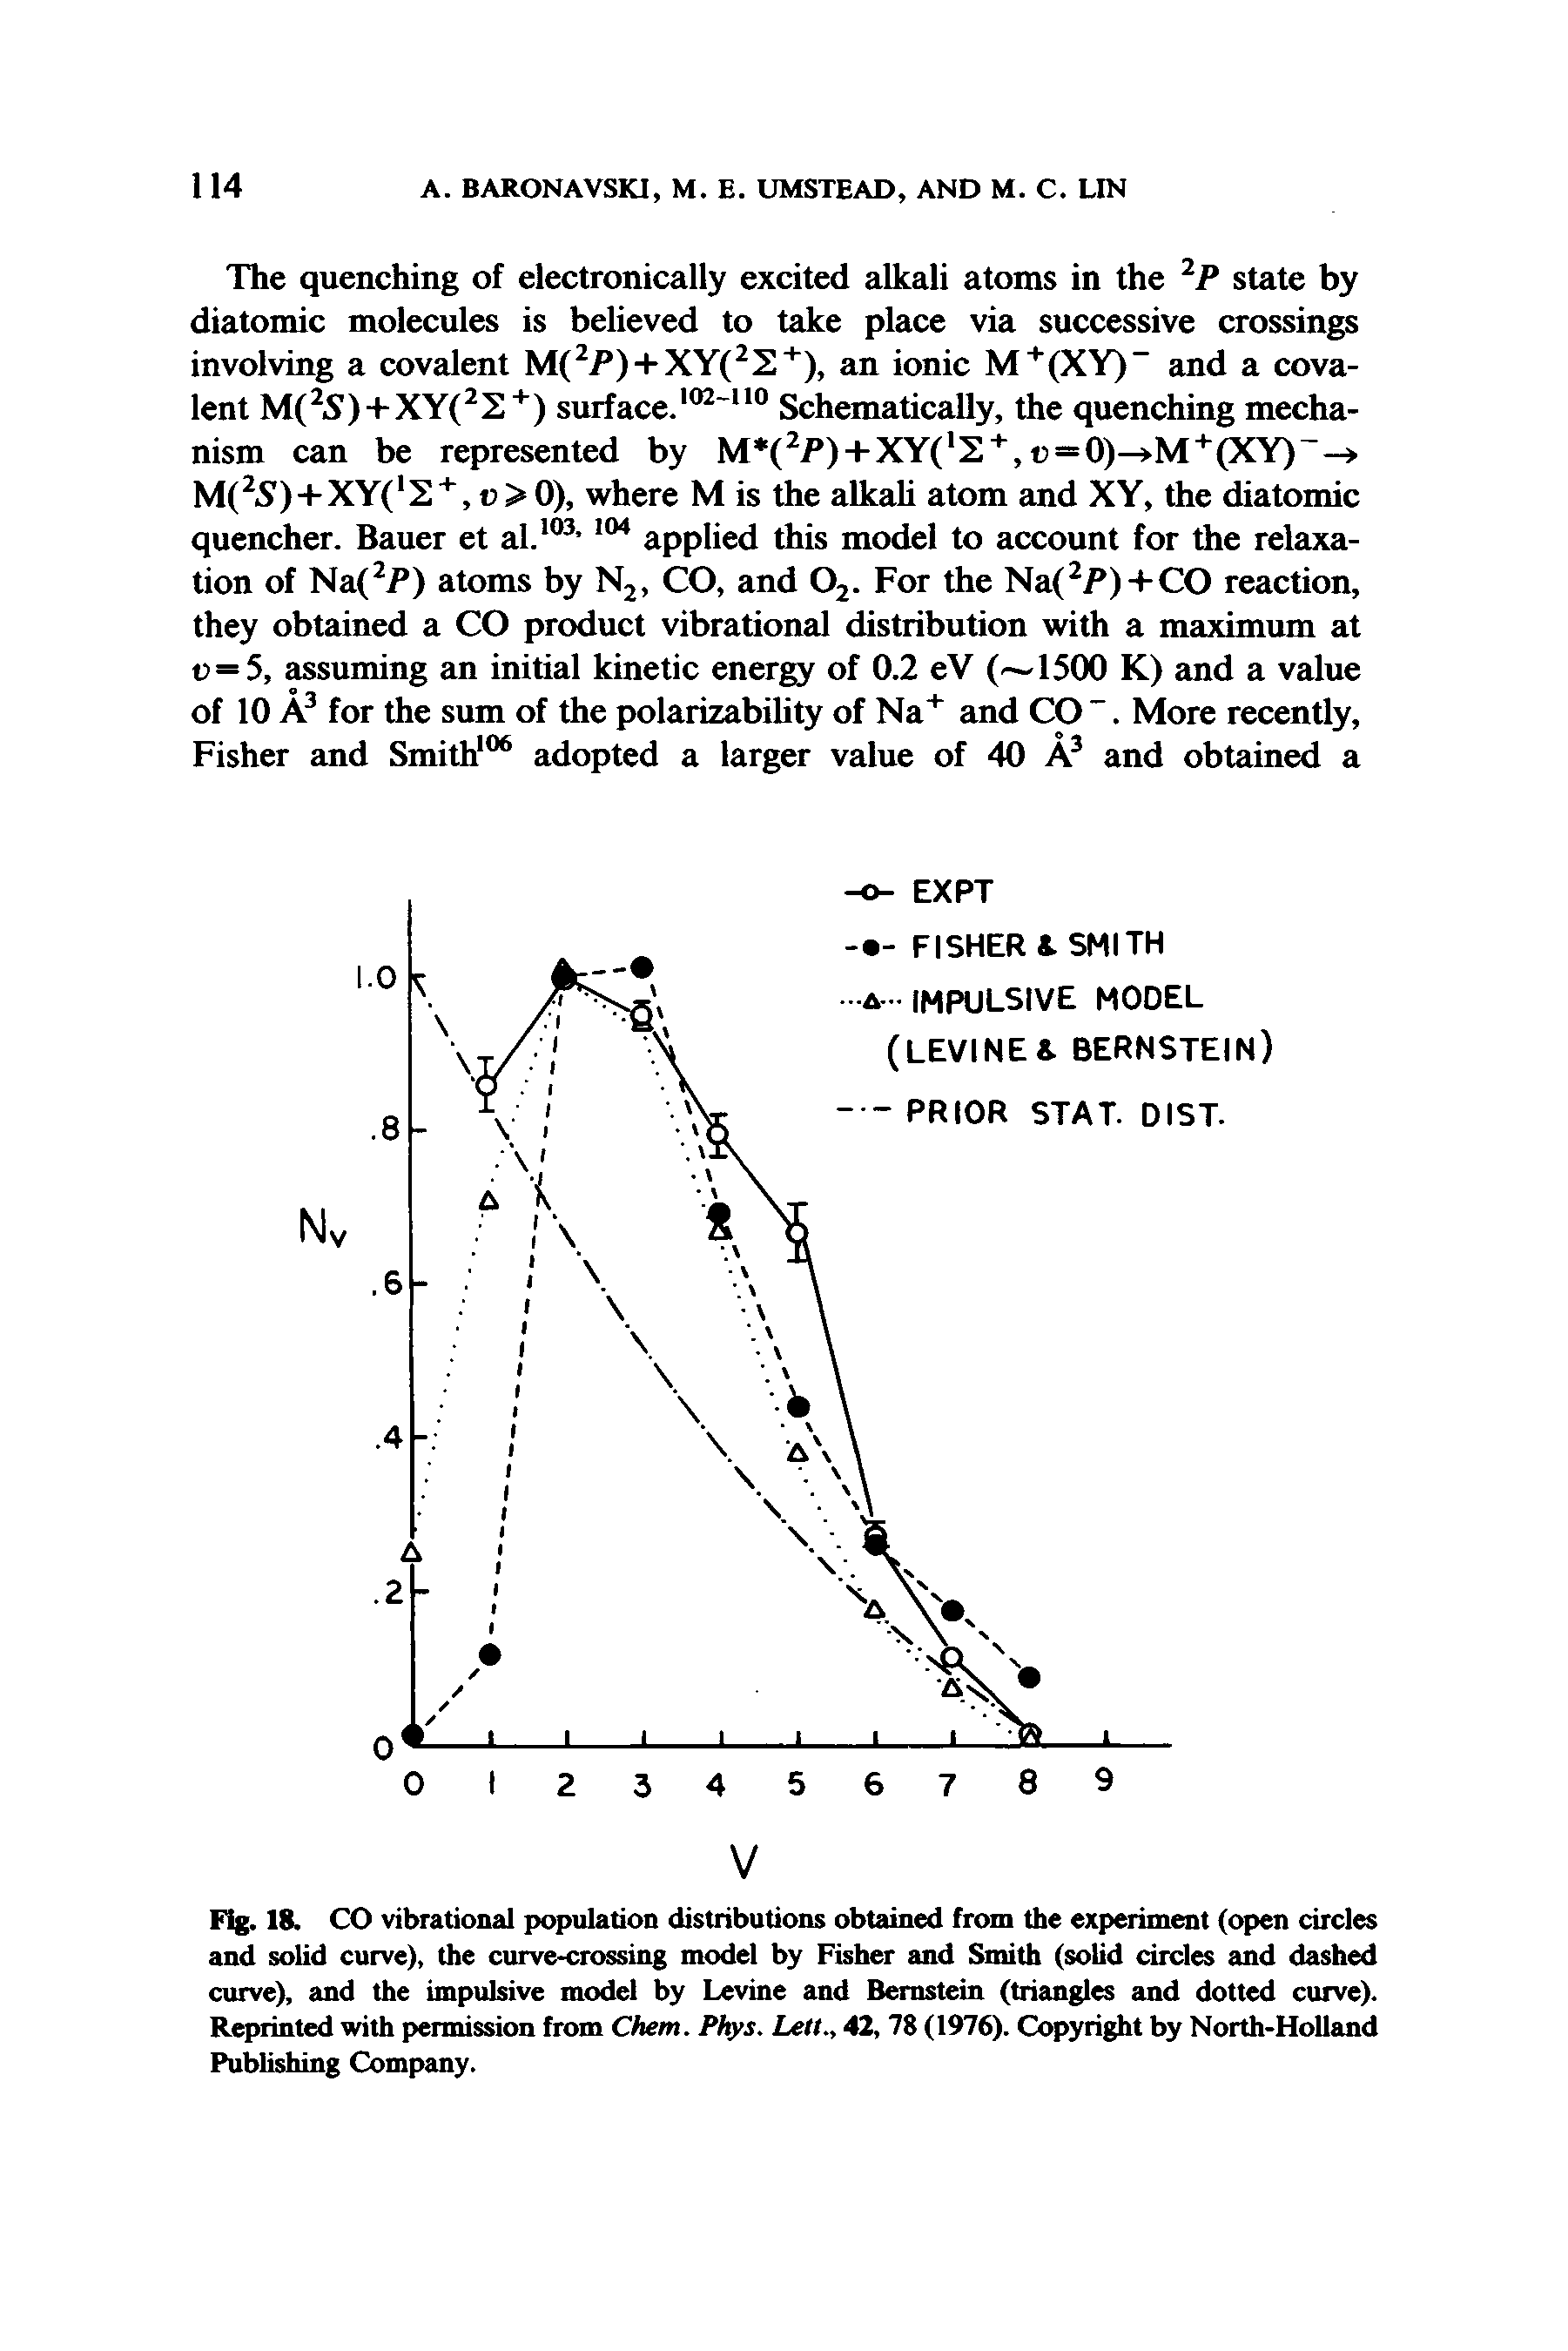 Fig. 18. CO vibrational population distributions obtained from the experiment (open circles and solid curve), the ciuve-crossing model by Fisher and Smith (solid circles and dashed curve), and the impulsive model by Levine and Bernstein (triangles and dotted curve). Reprinted with permission from Chem. Pfys. Lett., 42, 78 (1976). Copyright by North-HoUand Publishing Company.